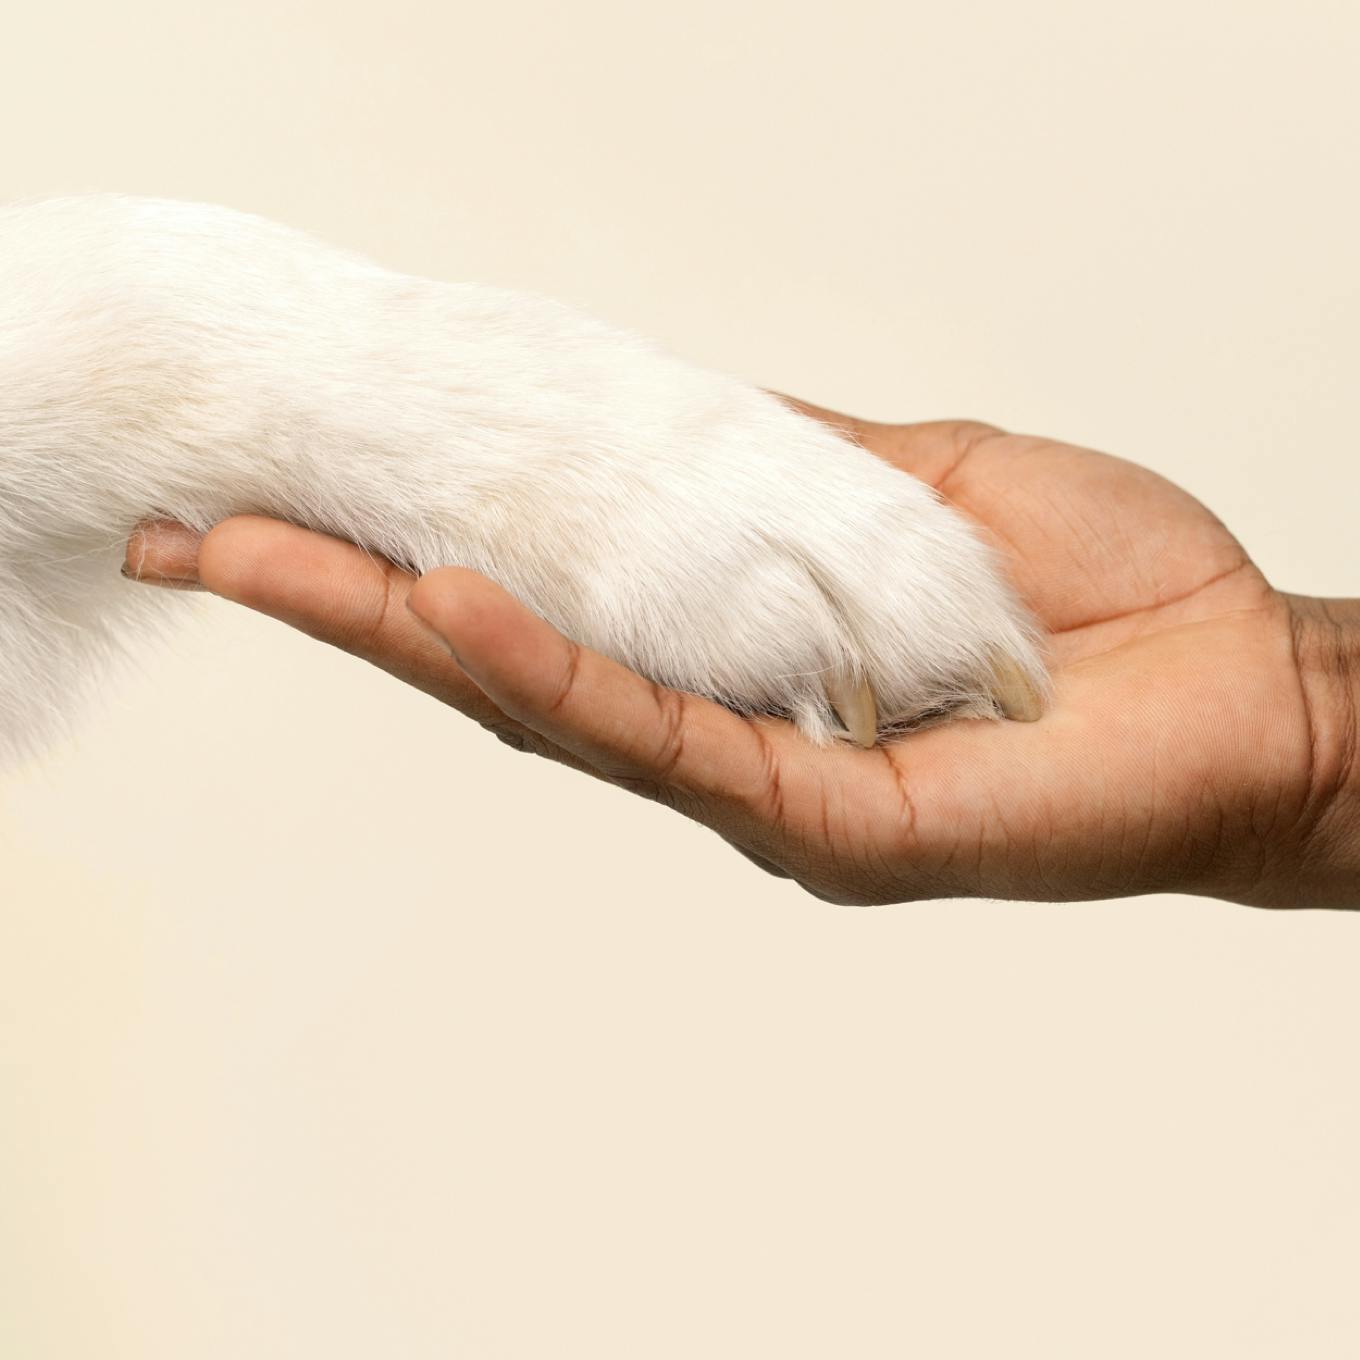 vet's hand gently holding dog's paw